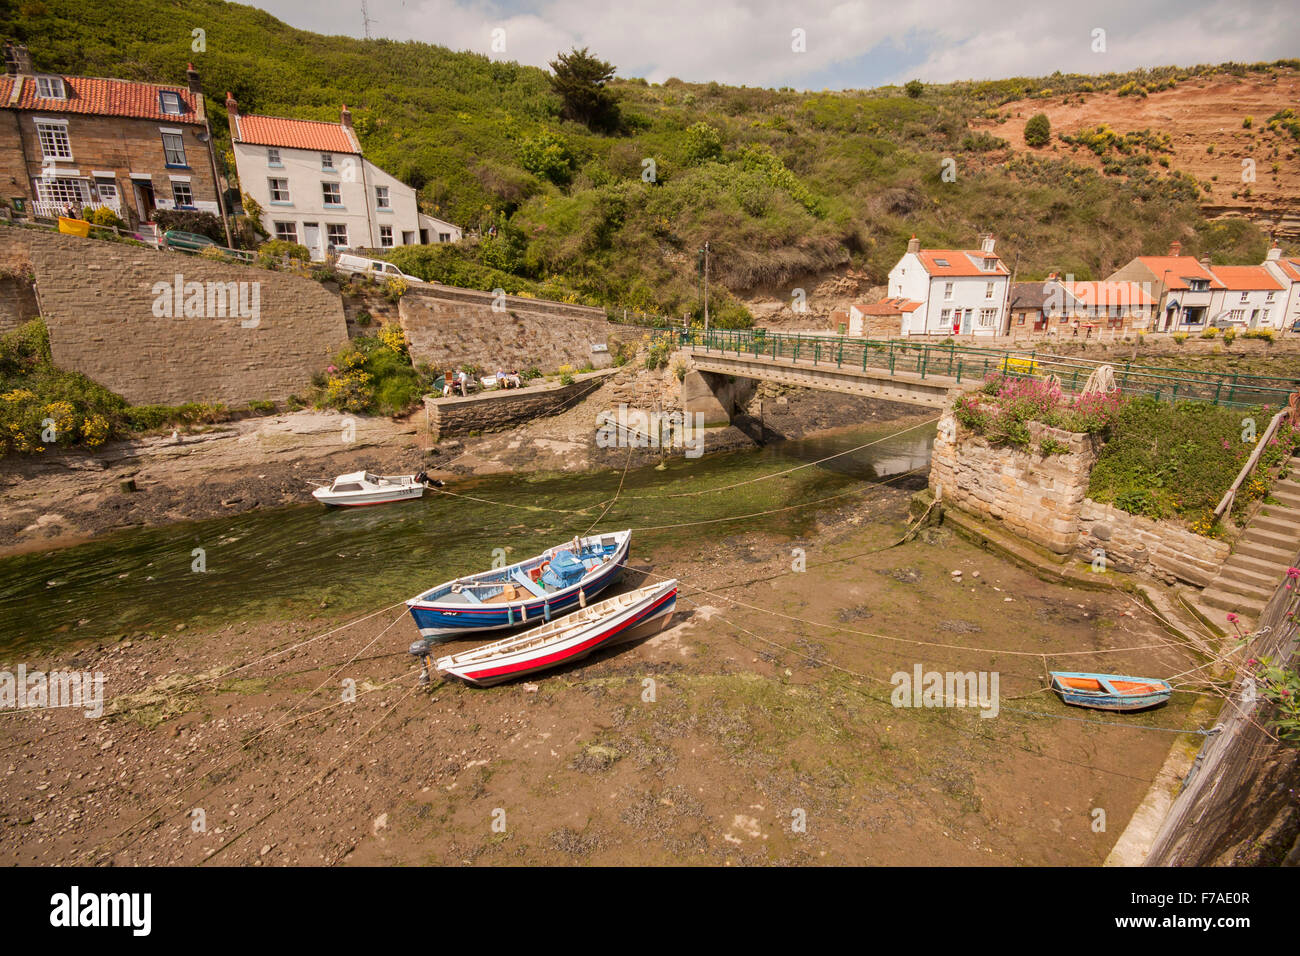 Picturesque view of Staithes fishing village in North Yorks including artists, boats and footbridge Stock Photo